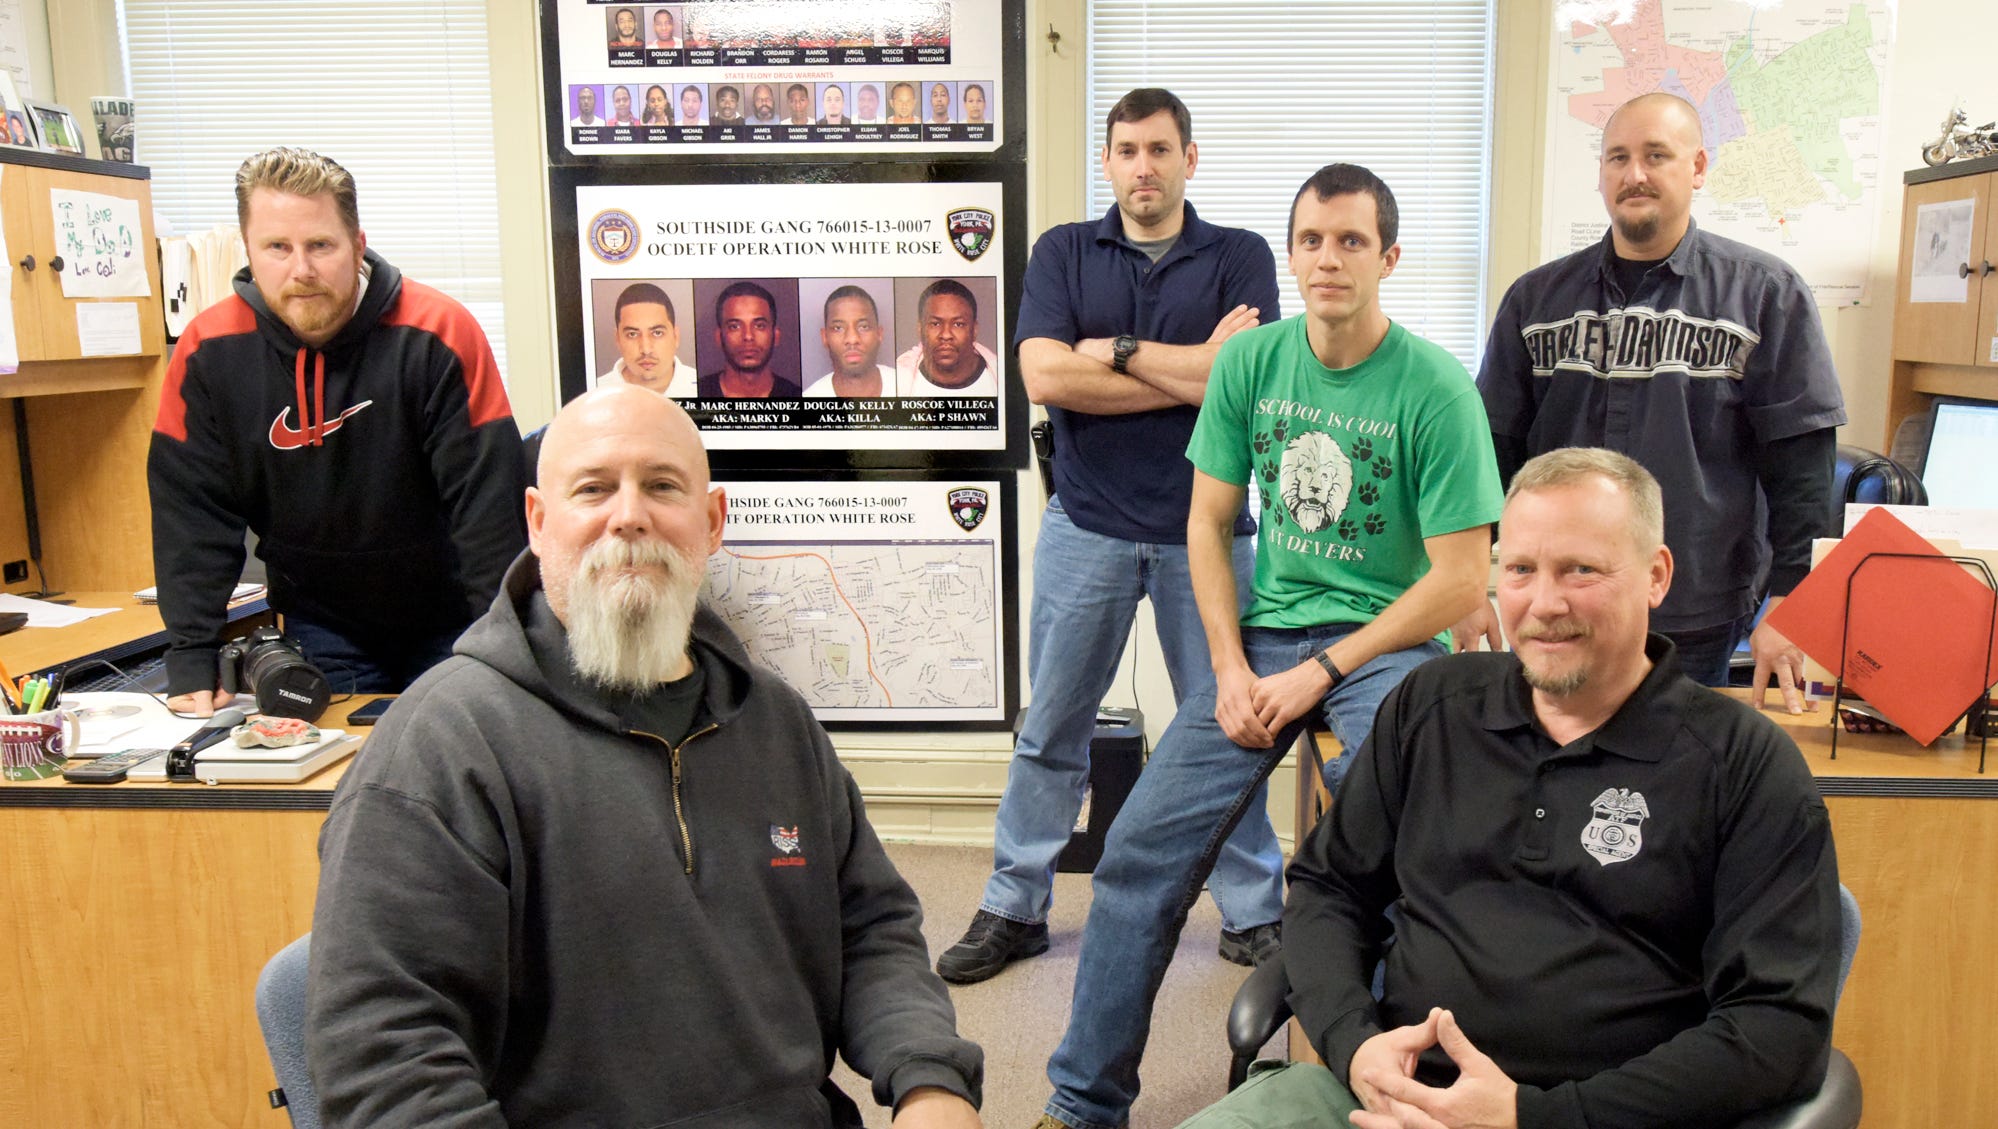 York City Narcotics Squad members, from left, Detective Scott Nadzom, Detective First Class Andy Shaffer, Officer Stephen Aderhold, Officer Zach Pelton, ATF Special Agent Scott Endy and Detective Bart Seelig, pose in their headquarters in an old York City fire station. The poster on the wall references the Southside Gang whose members are facing federal prosecution due to the efforts of the group. (Bill Kalina - The York Dispatch)